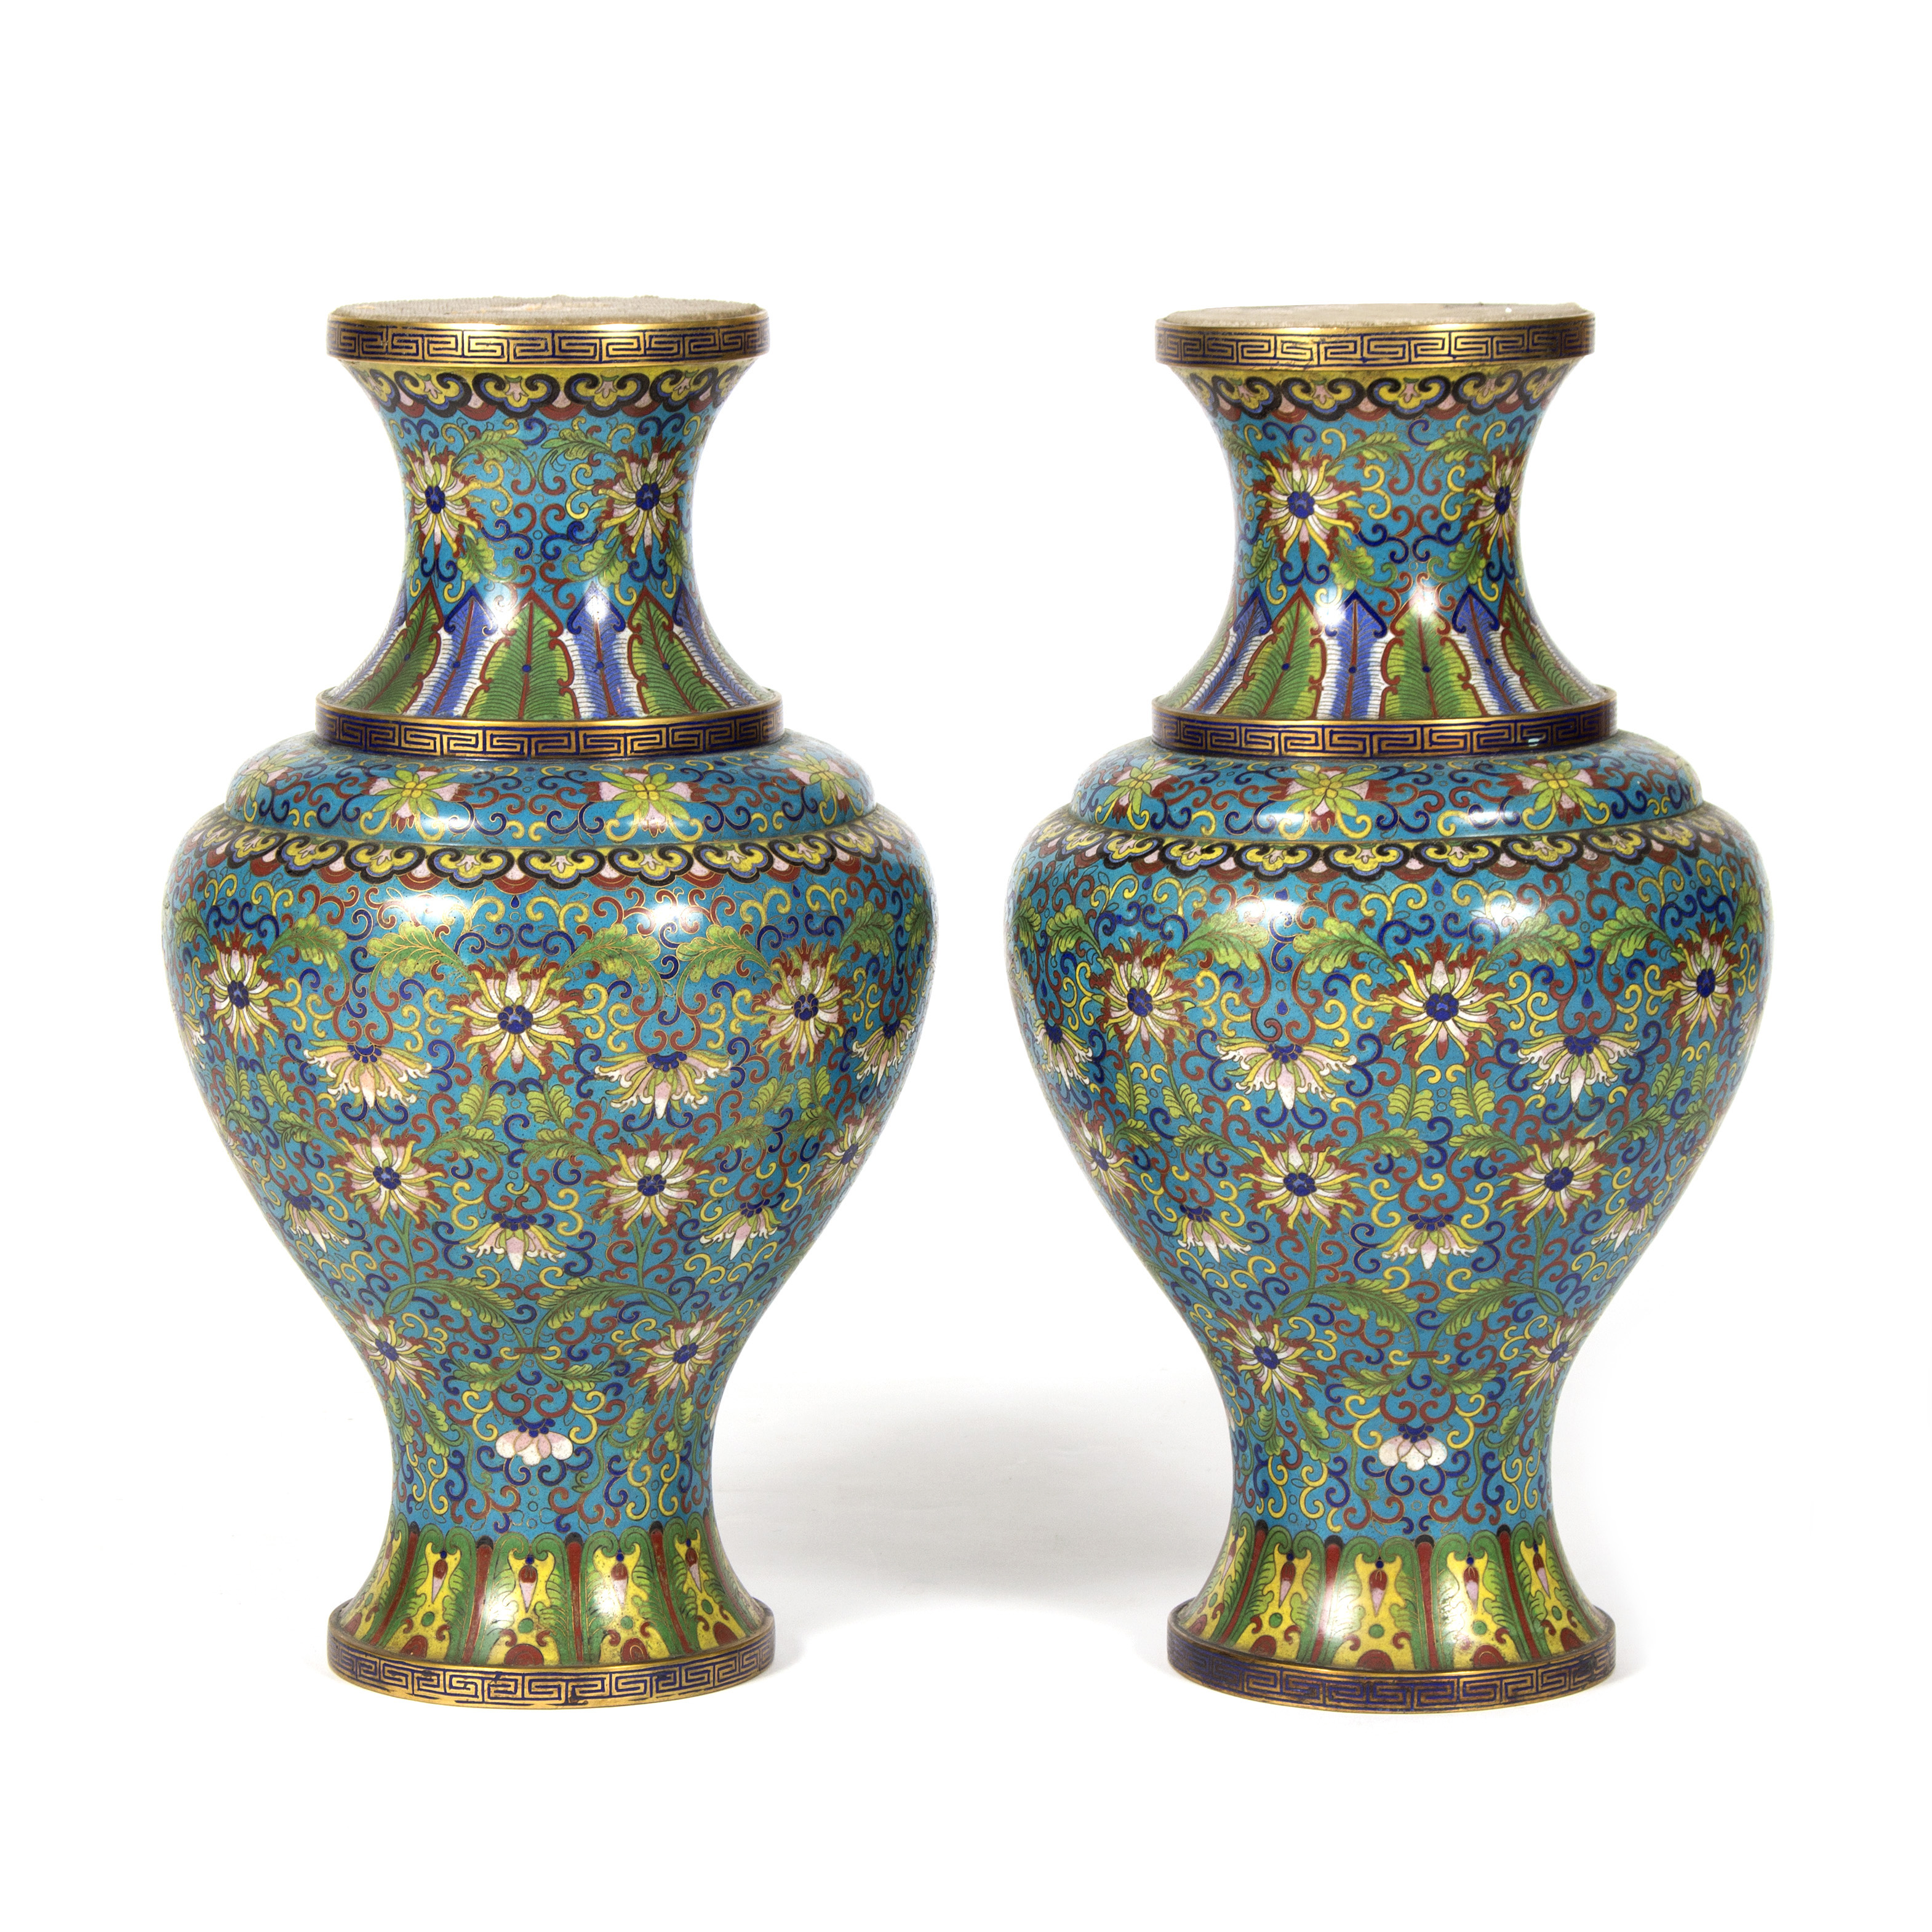 A large pair of Chinese cloisonné vases mounted as lamps,